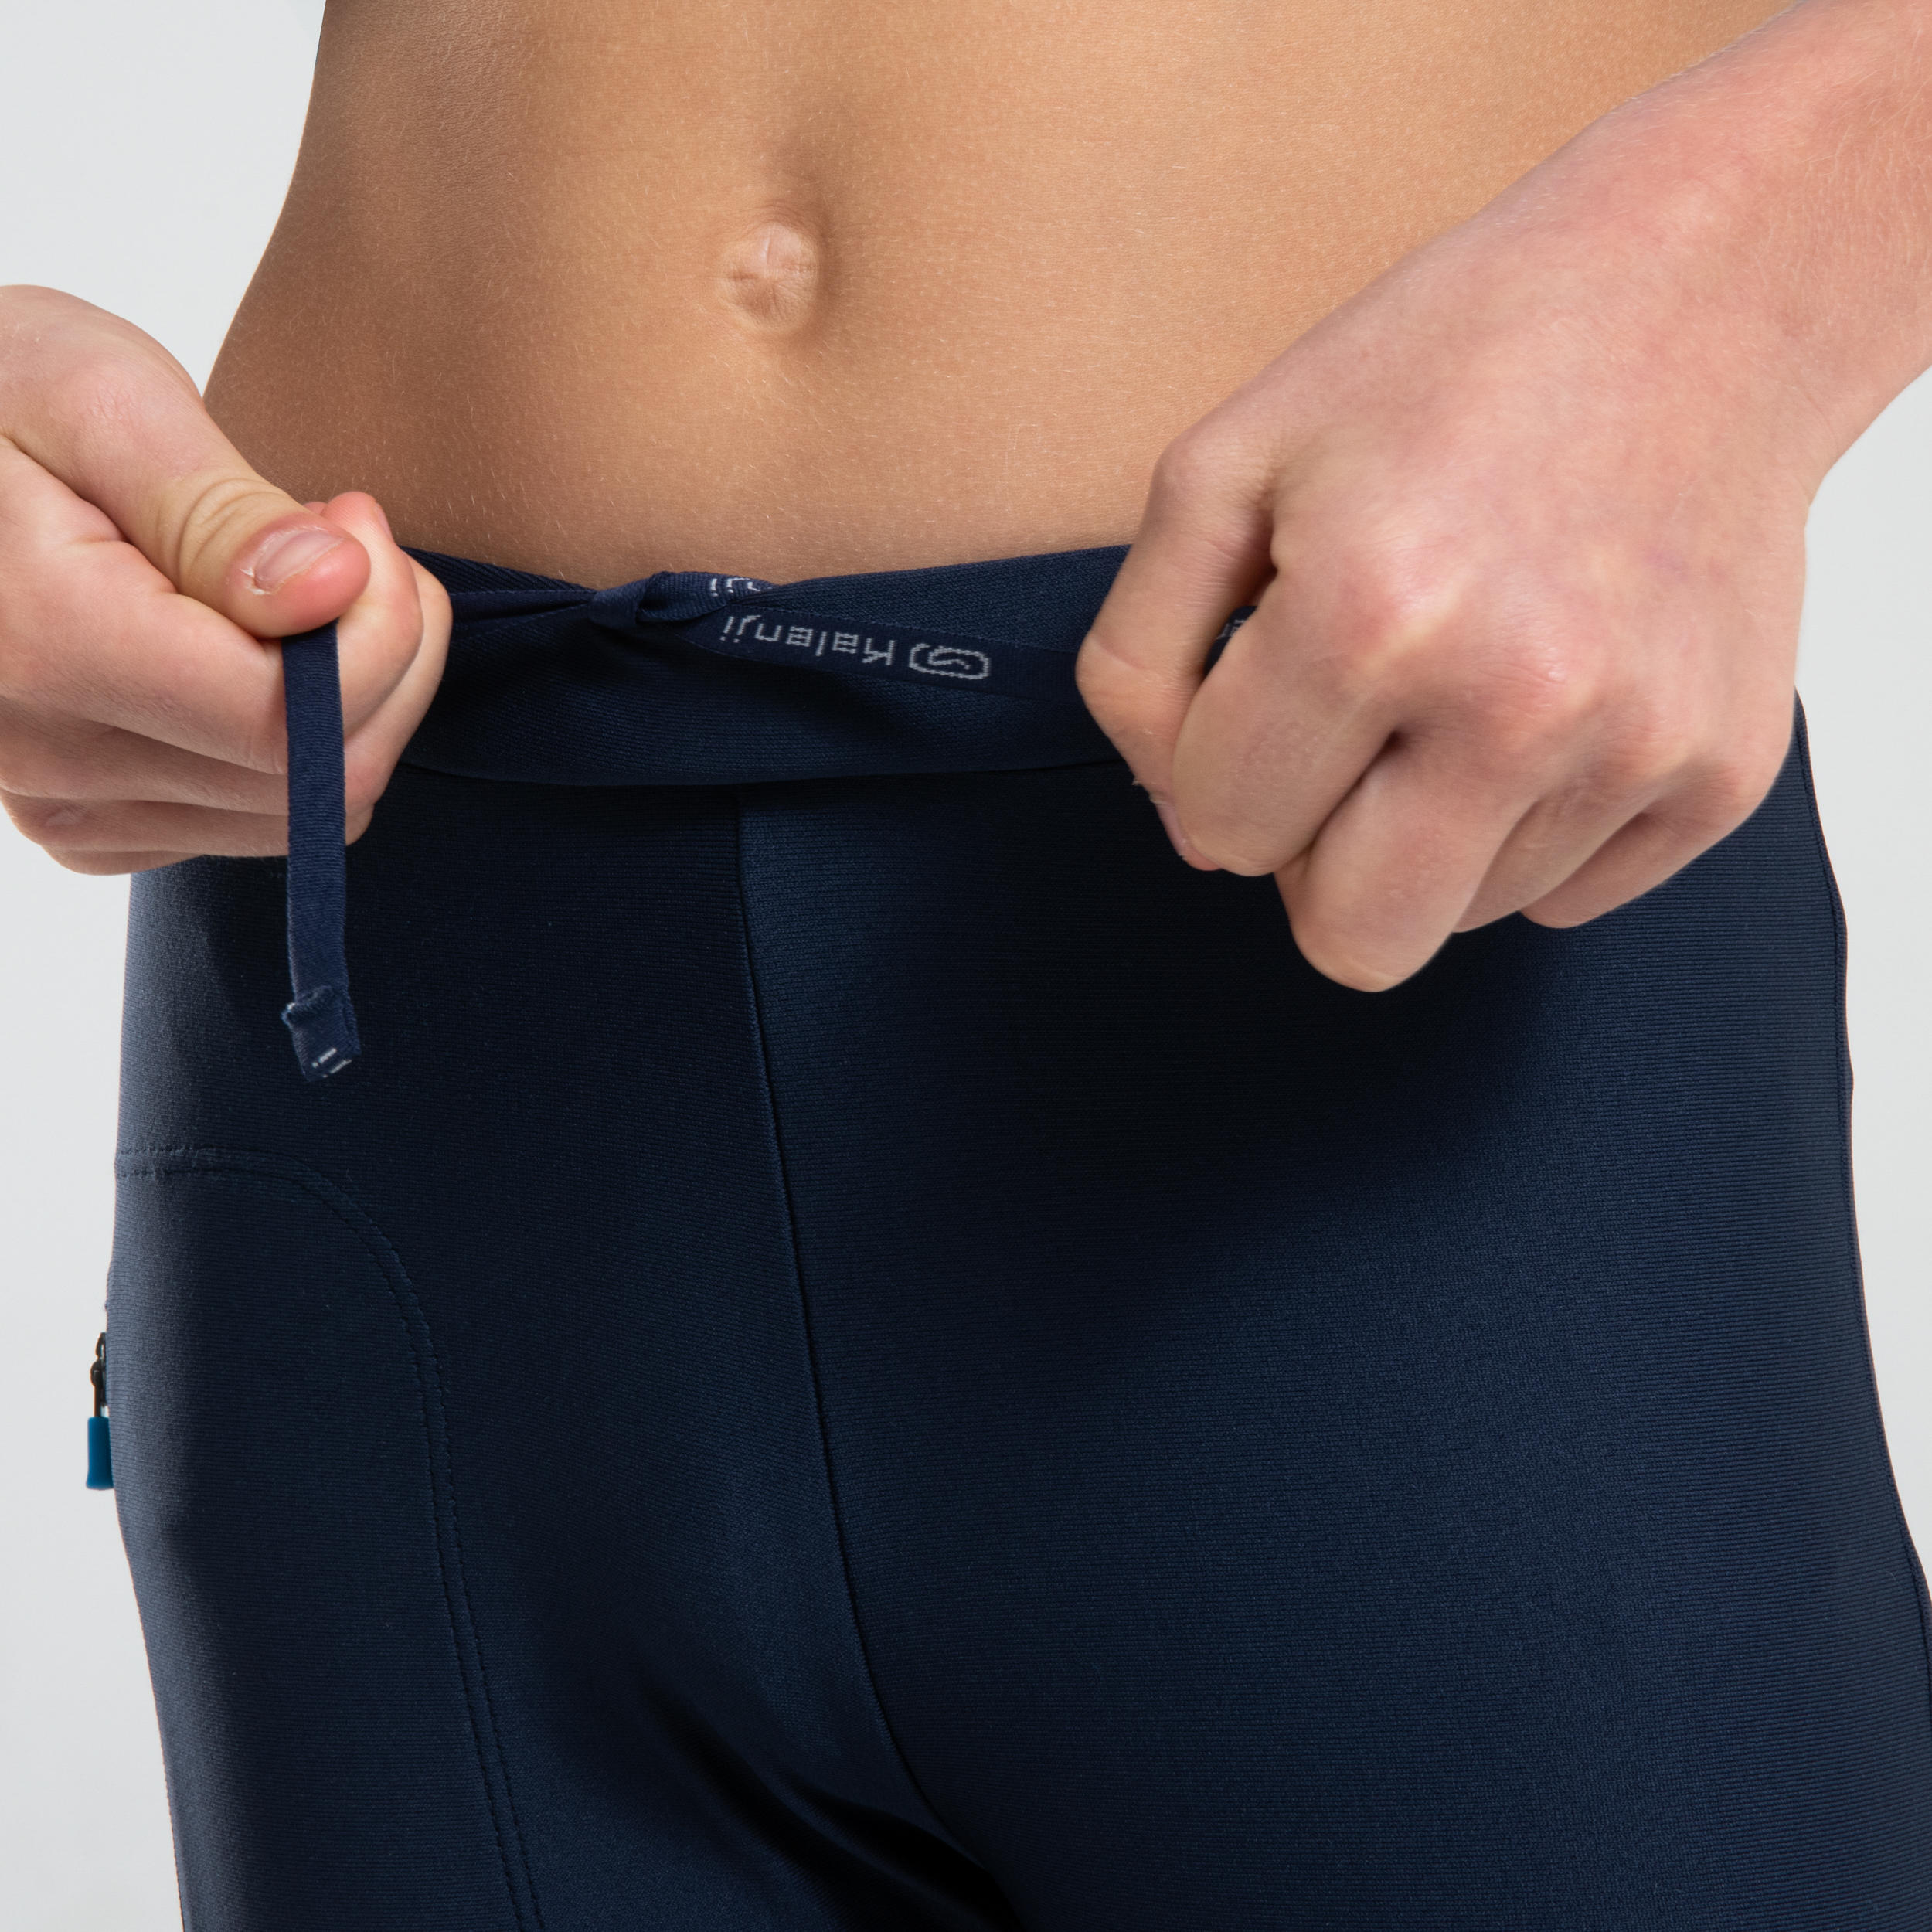 AT 100 KIDS' ATHLETICS CROPPED BOTTOMS - NAVY BLUE/TURQUOISE 2/6